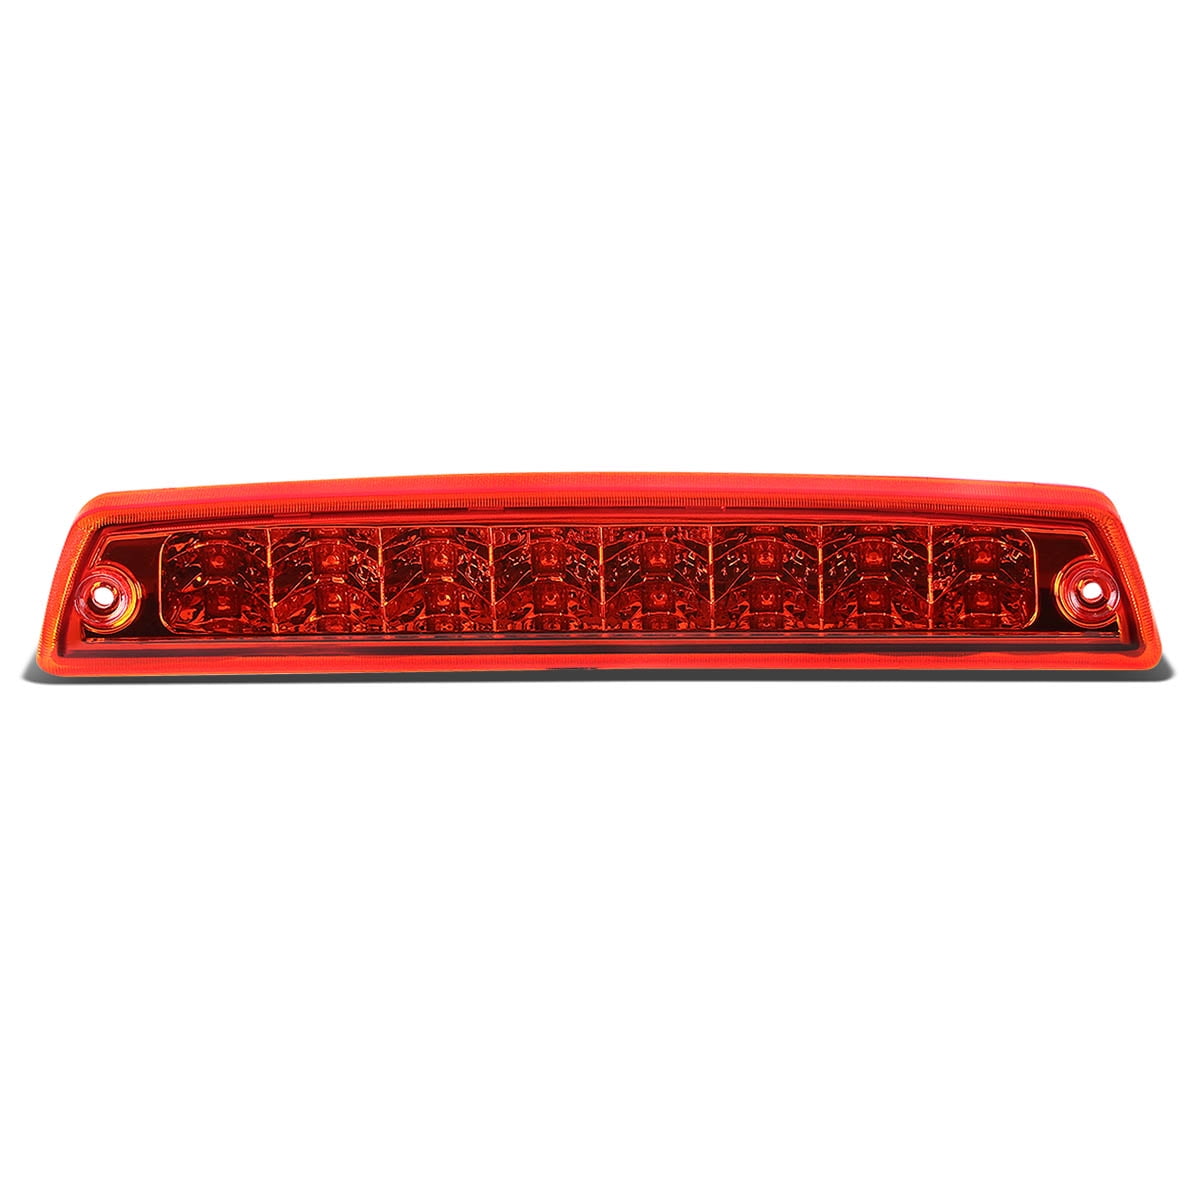 Dual Row LED Chrome Housing 3rd Third Tail Rear Brake Light Cargo Reverse Lamp Replacement for Dodge Ram BR/BE 94-02 